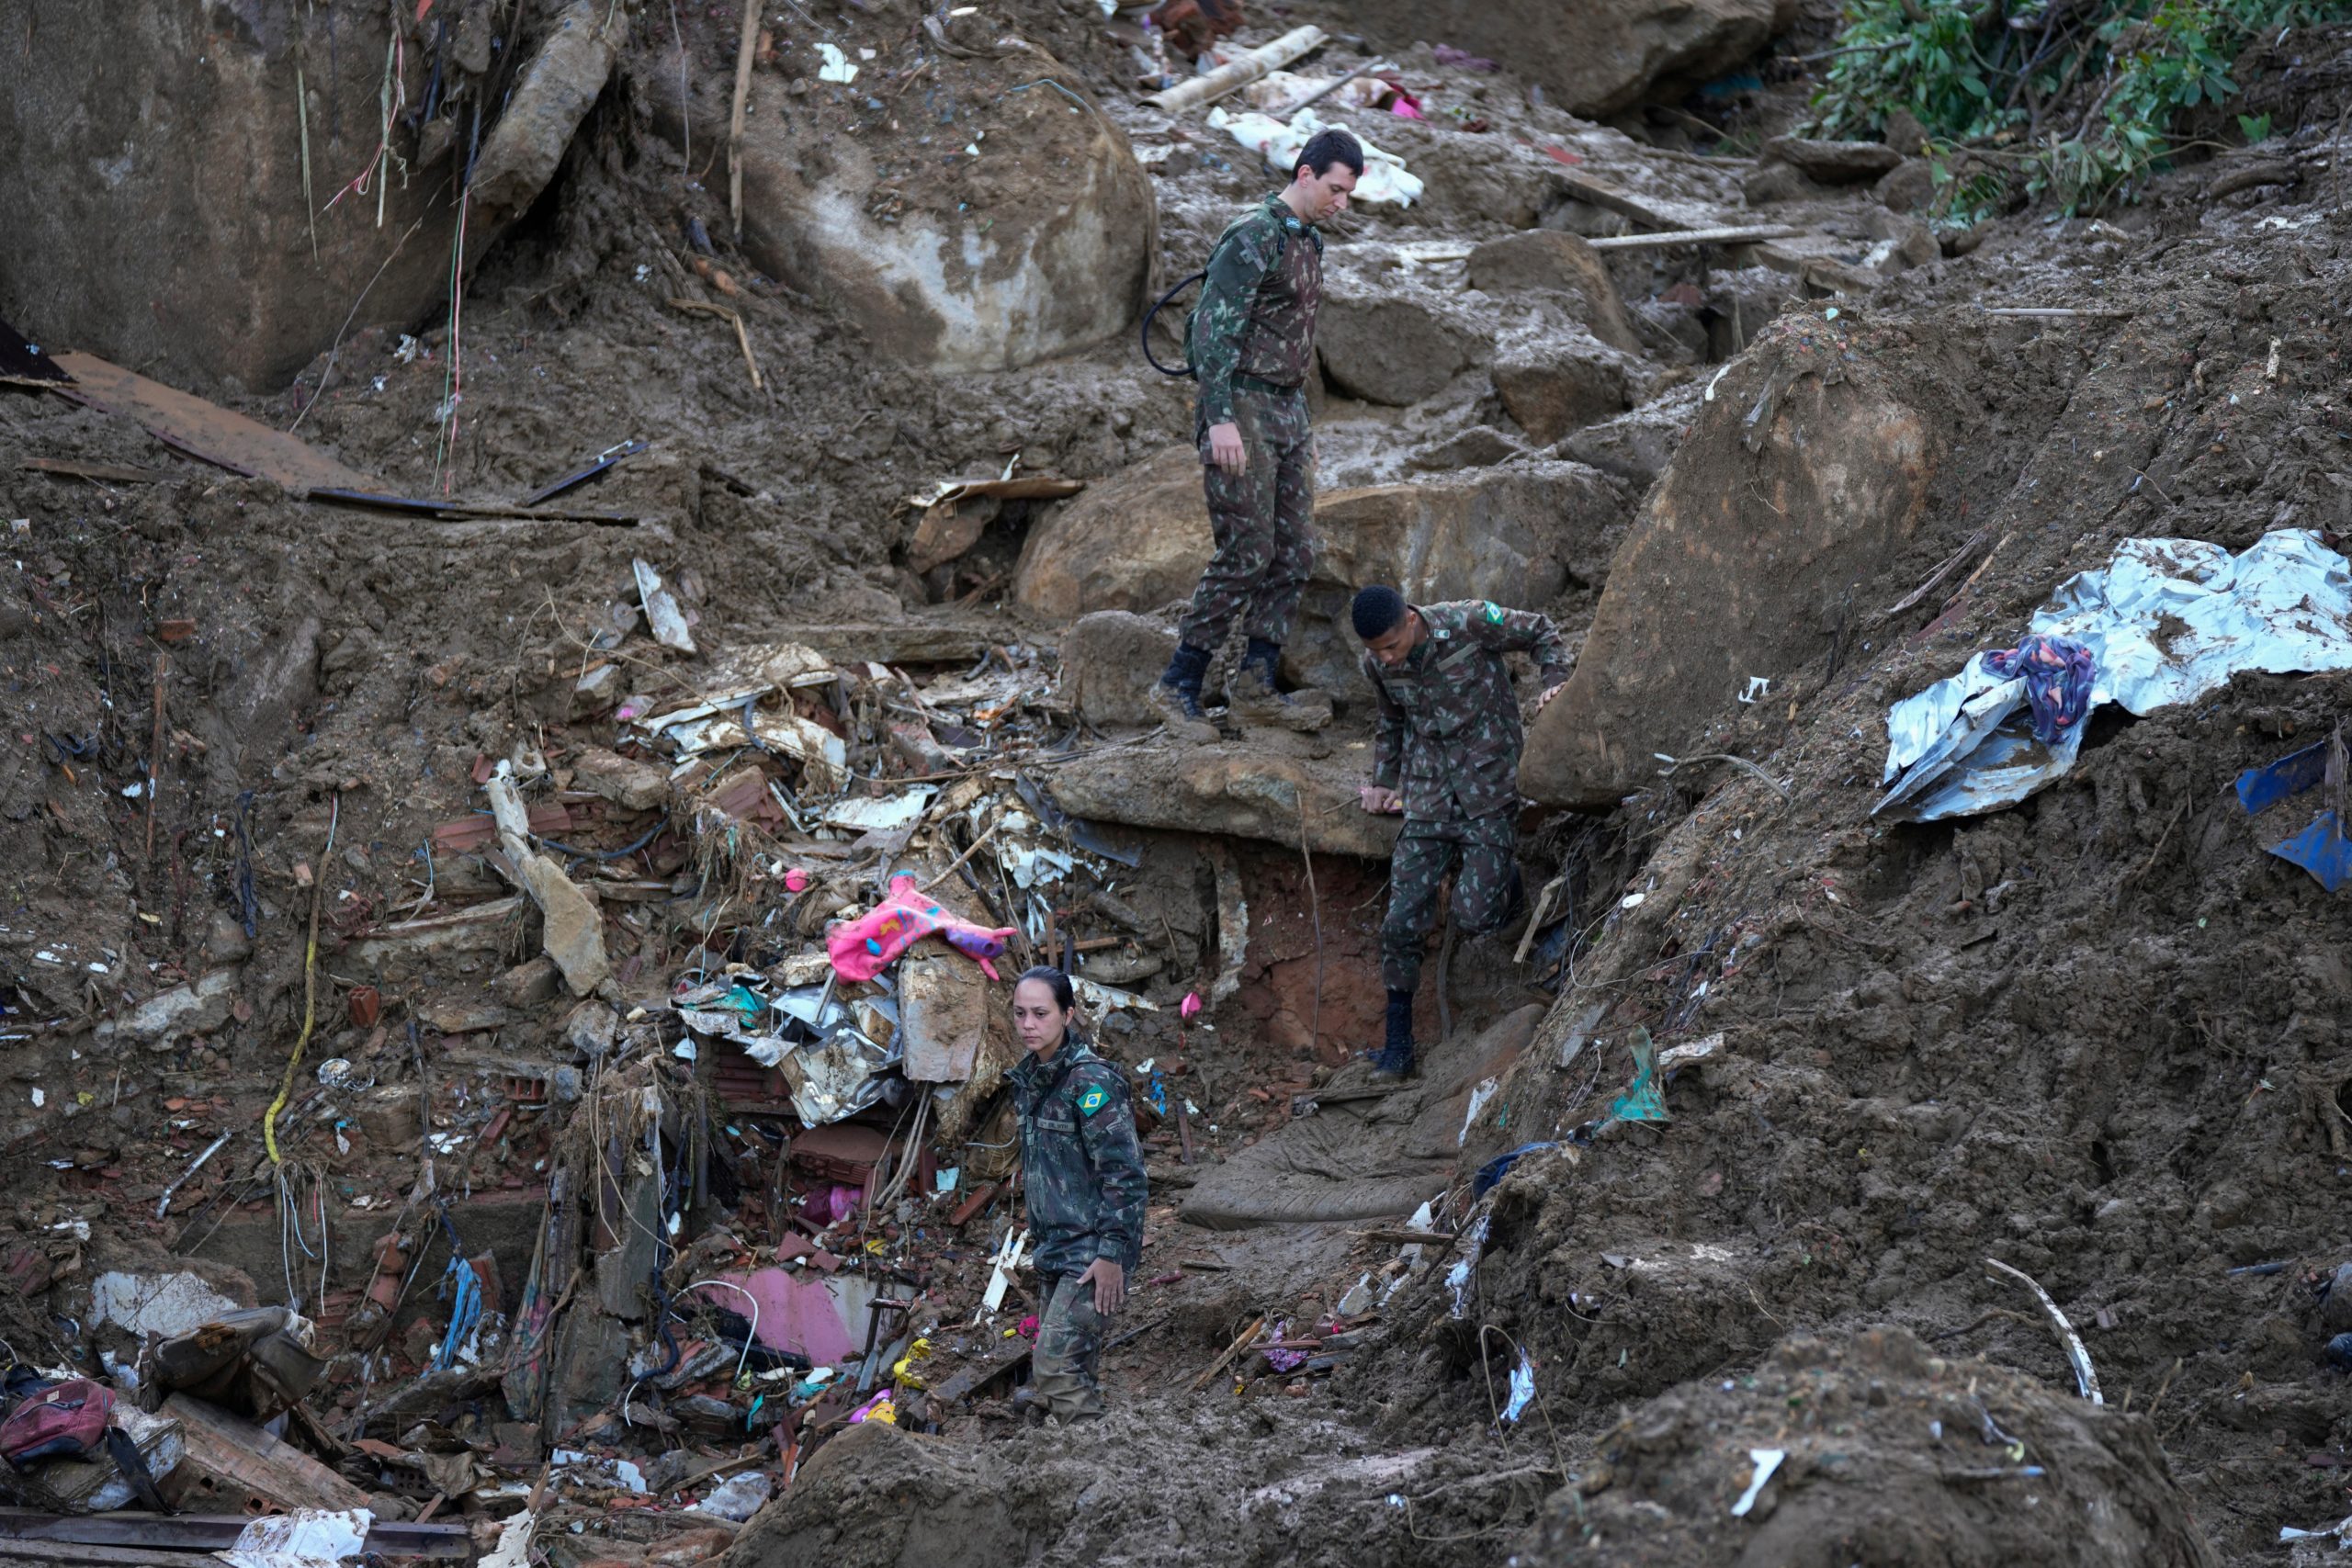 Soldiers look for survivors on the second day of rescue efforts. (Photo: Silvia Izquierdo, AP)